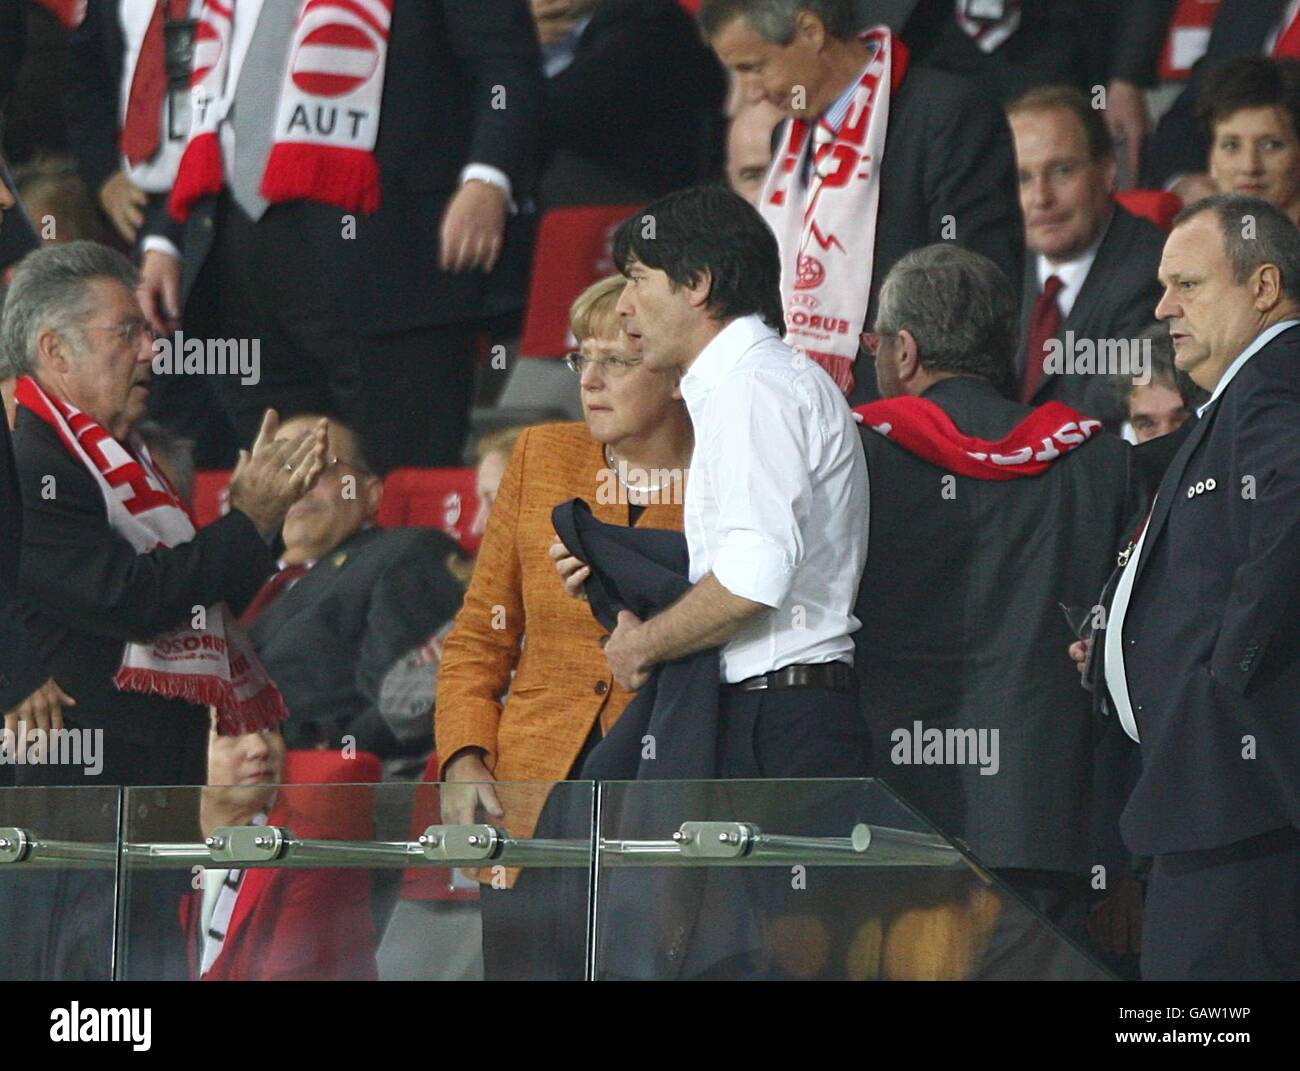 Germany's Chancellor Angela Merkel and Germany's manager Joachim Low in the stands (c) Stock Photo